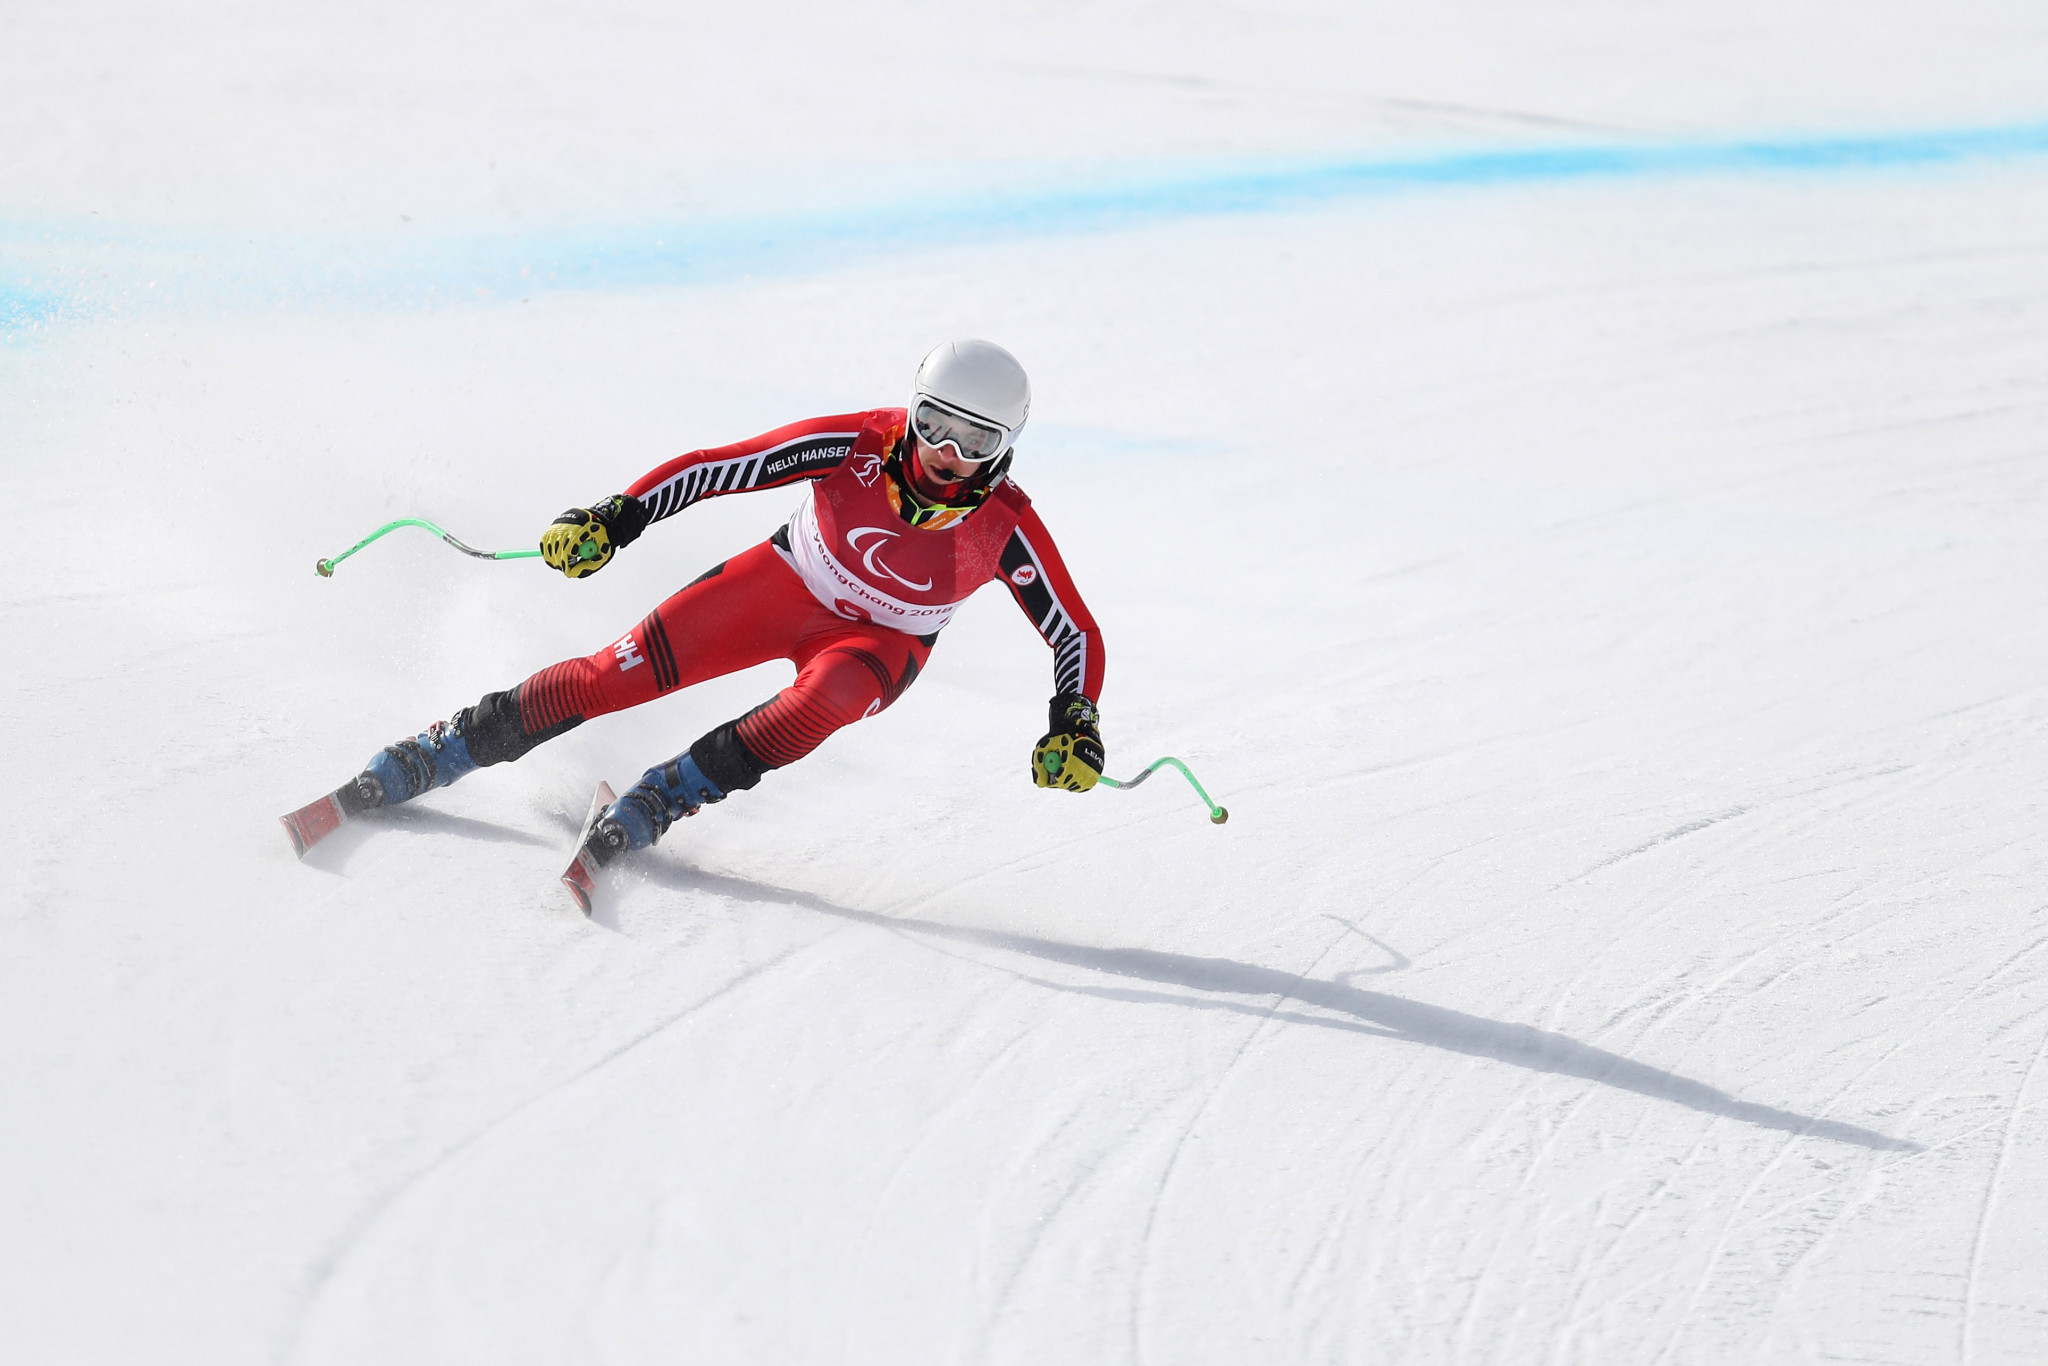 Canada's Mac Marcoux came out on top in the men's visually impaired event ©Getty Images